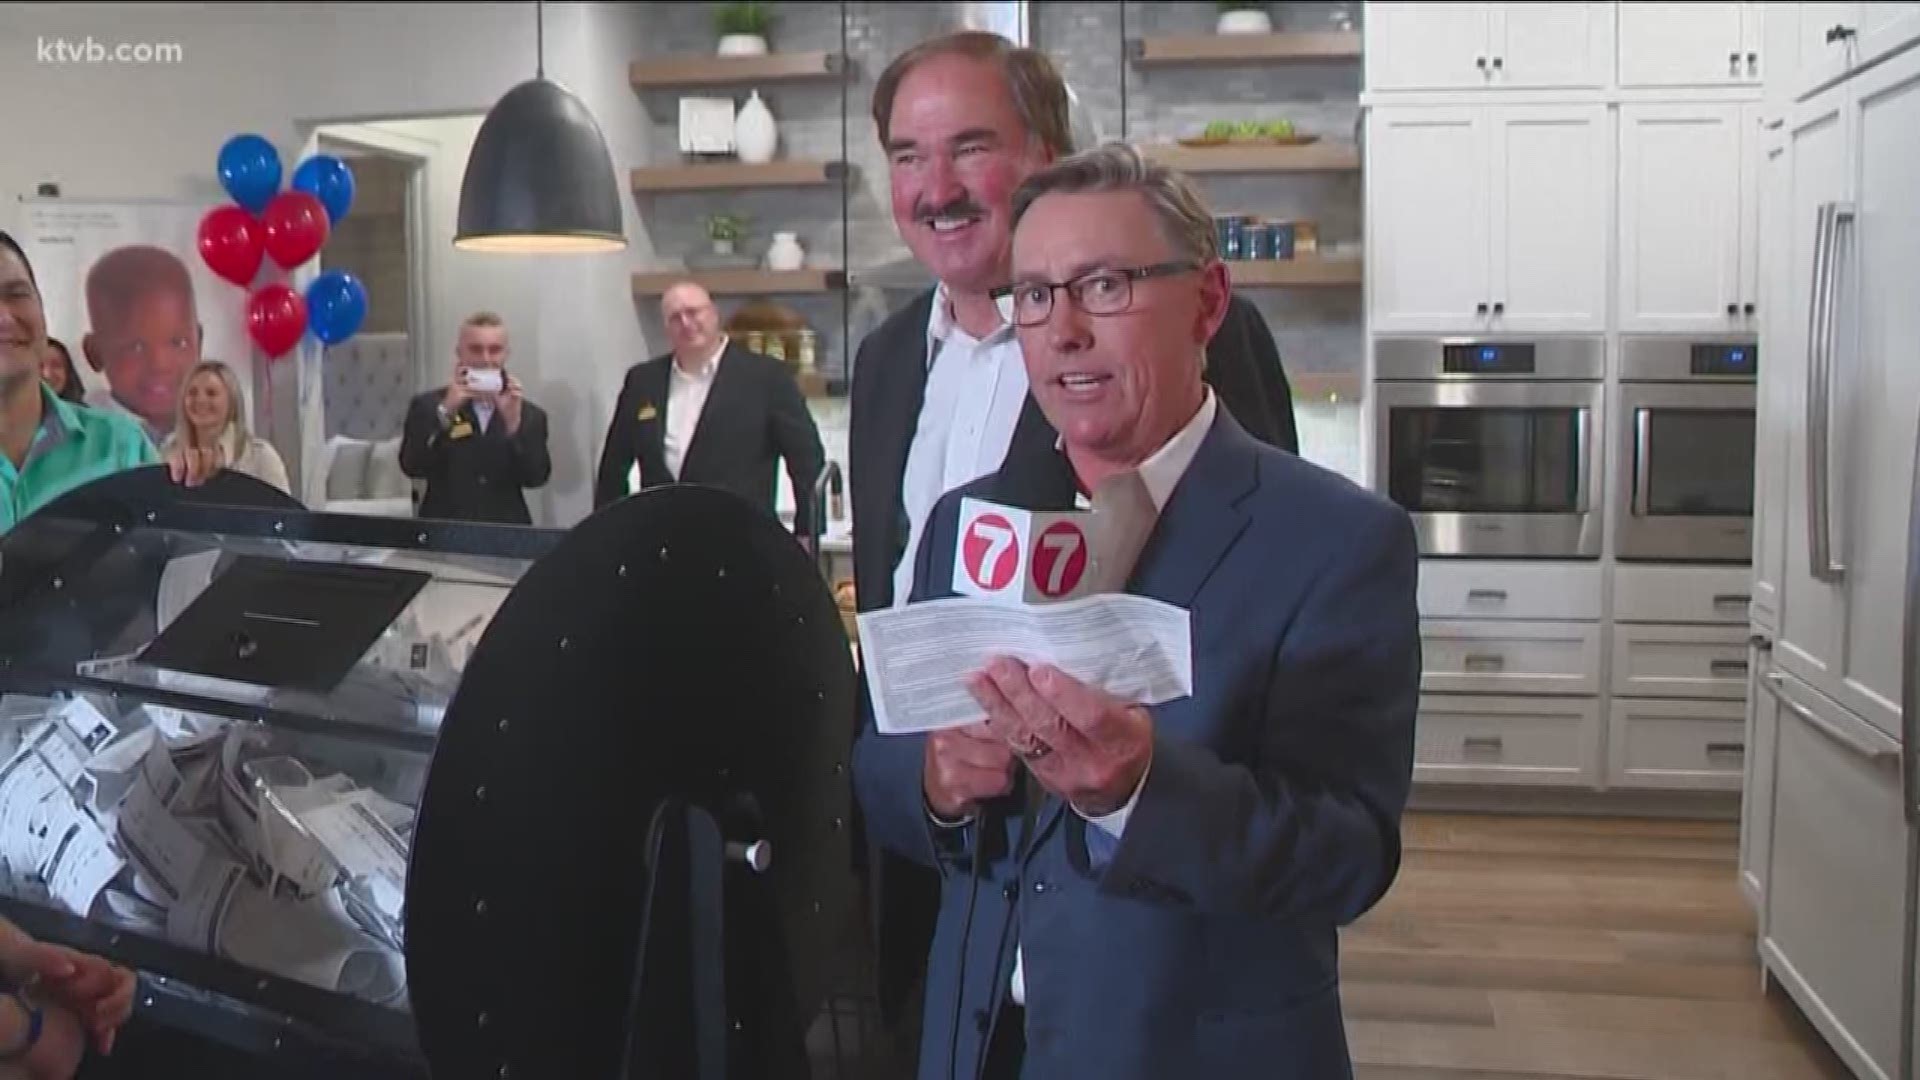 One lucky ticket holder won the 2018 St. Jude Dream Home, while others collected prizes including a $10,000 furniture shopping spree and club seats at Albertsons Stadium.